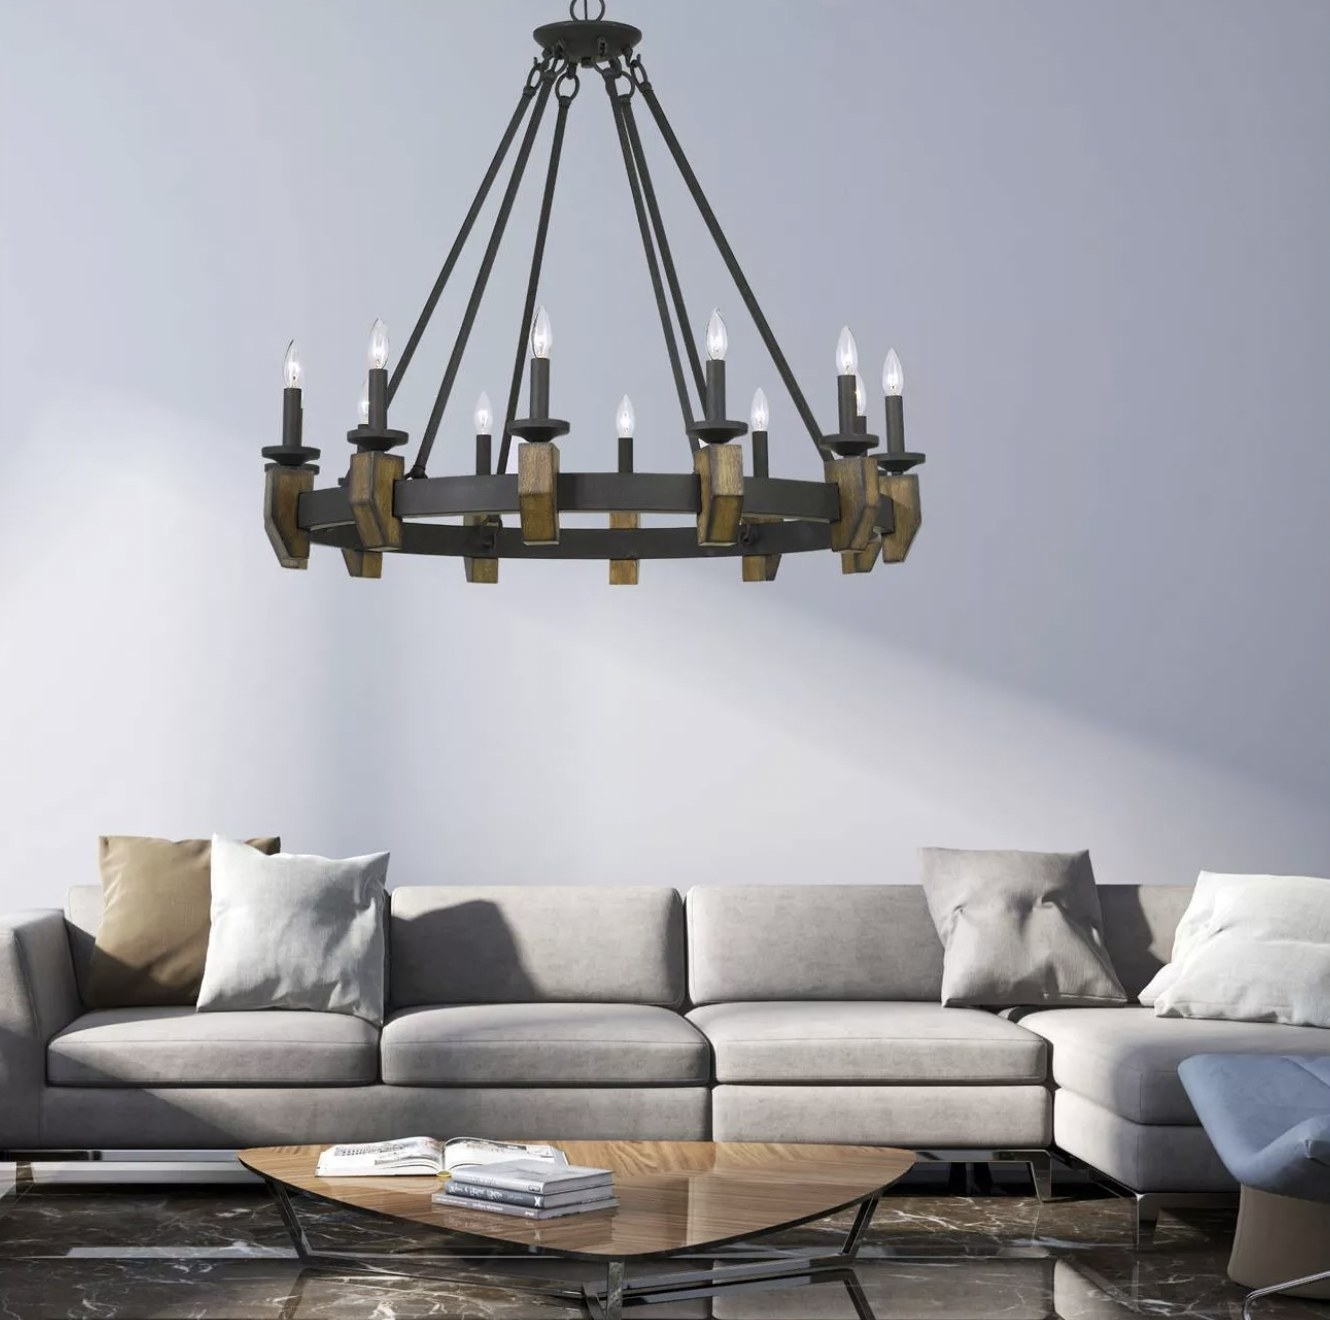 The metal and wood chandelier hanging in a living room